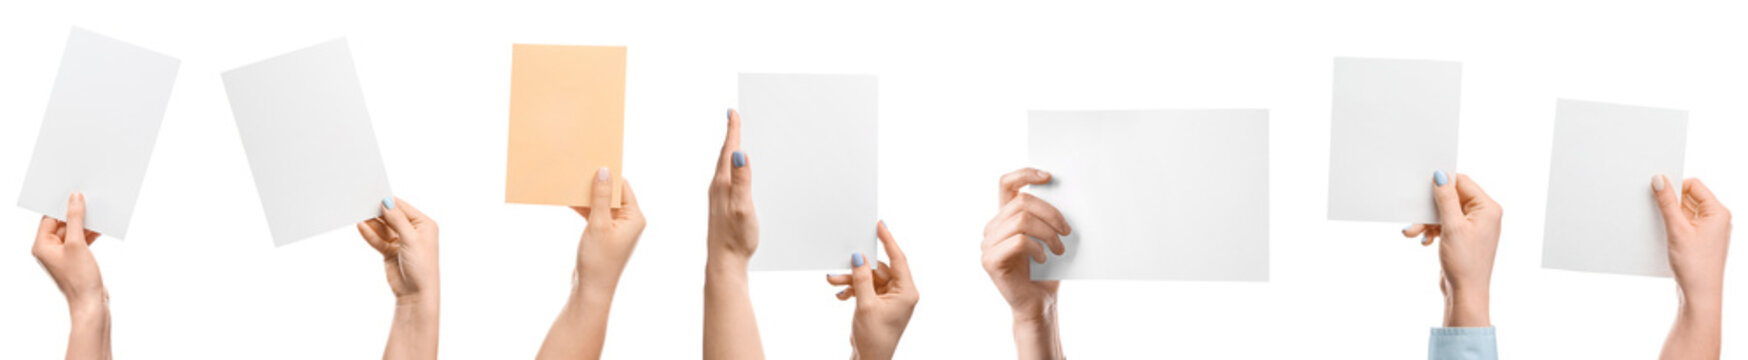 Collage of female hands holding blank paper sheets on white background